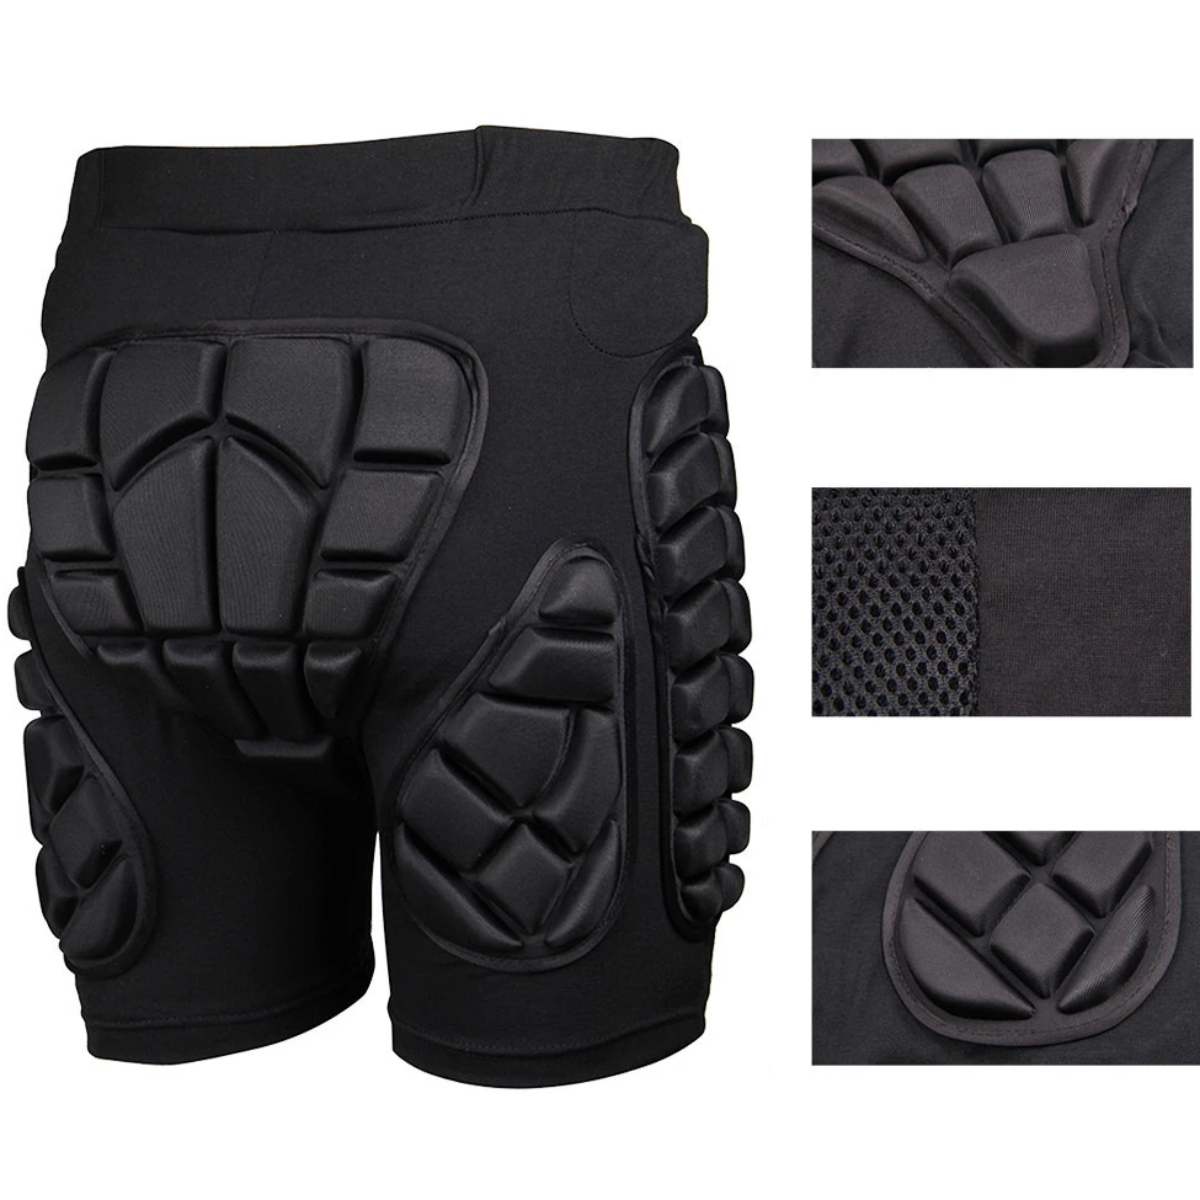 A pair of Motorcycle Protective Armor Pants for Men & Women with knee pads, serving as protective gear.